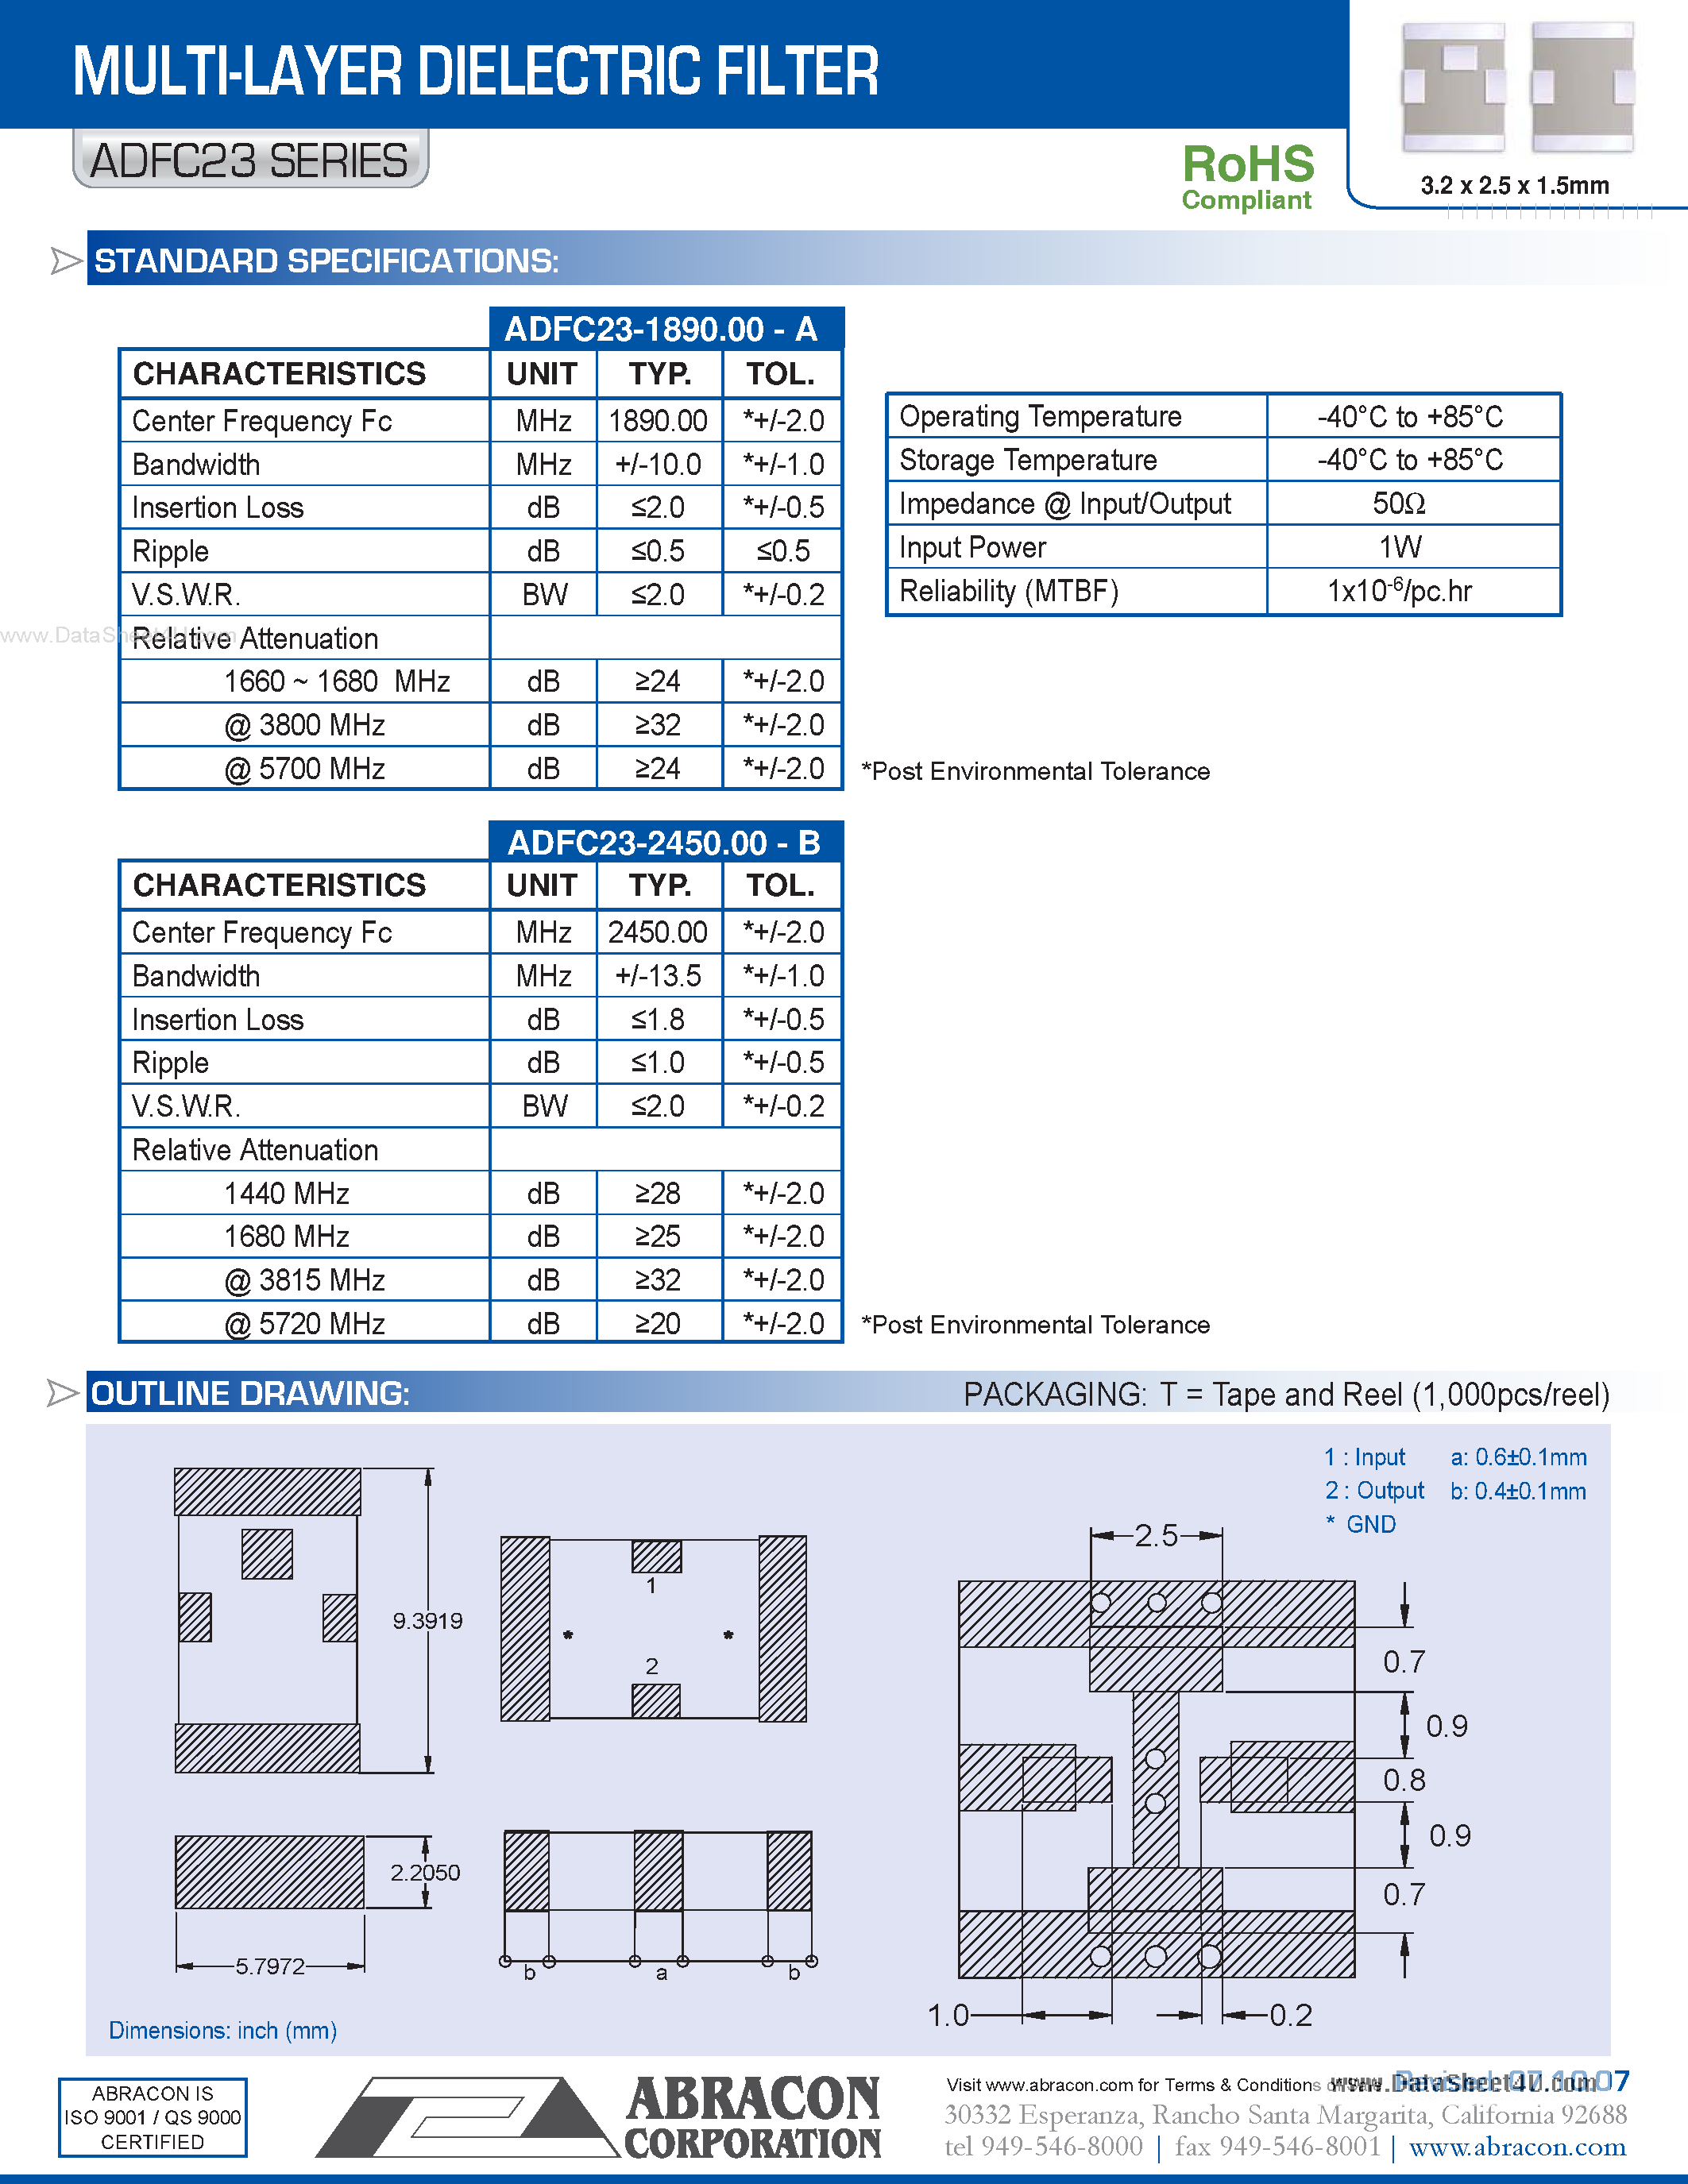 Datasheet ADFC23 - MULTI-LAYER DIELECTRIC FILTER page 1